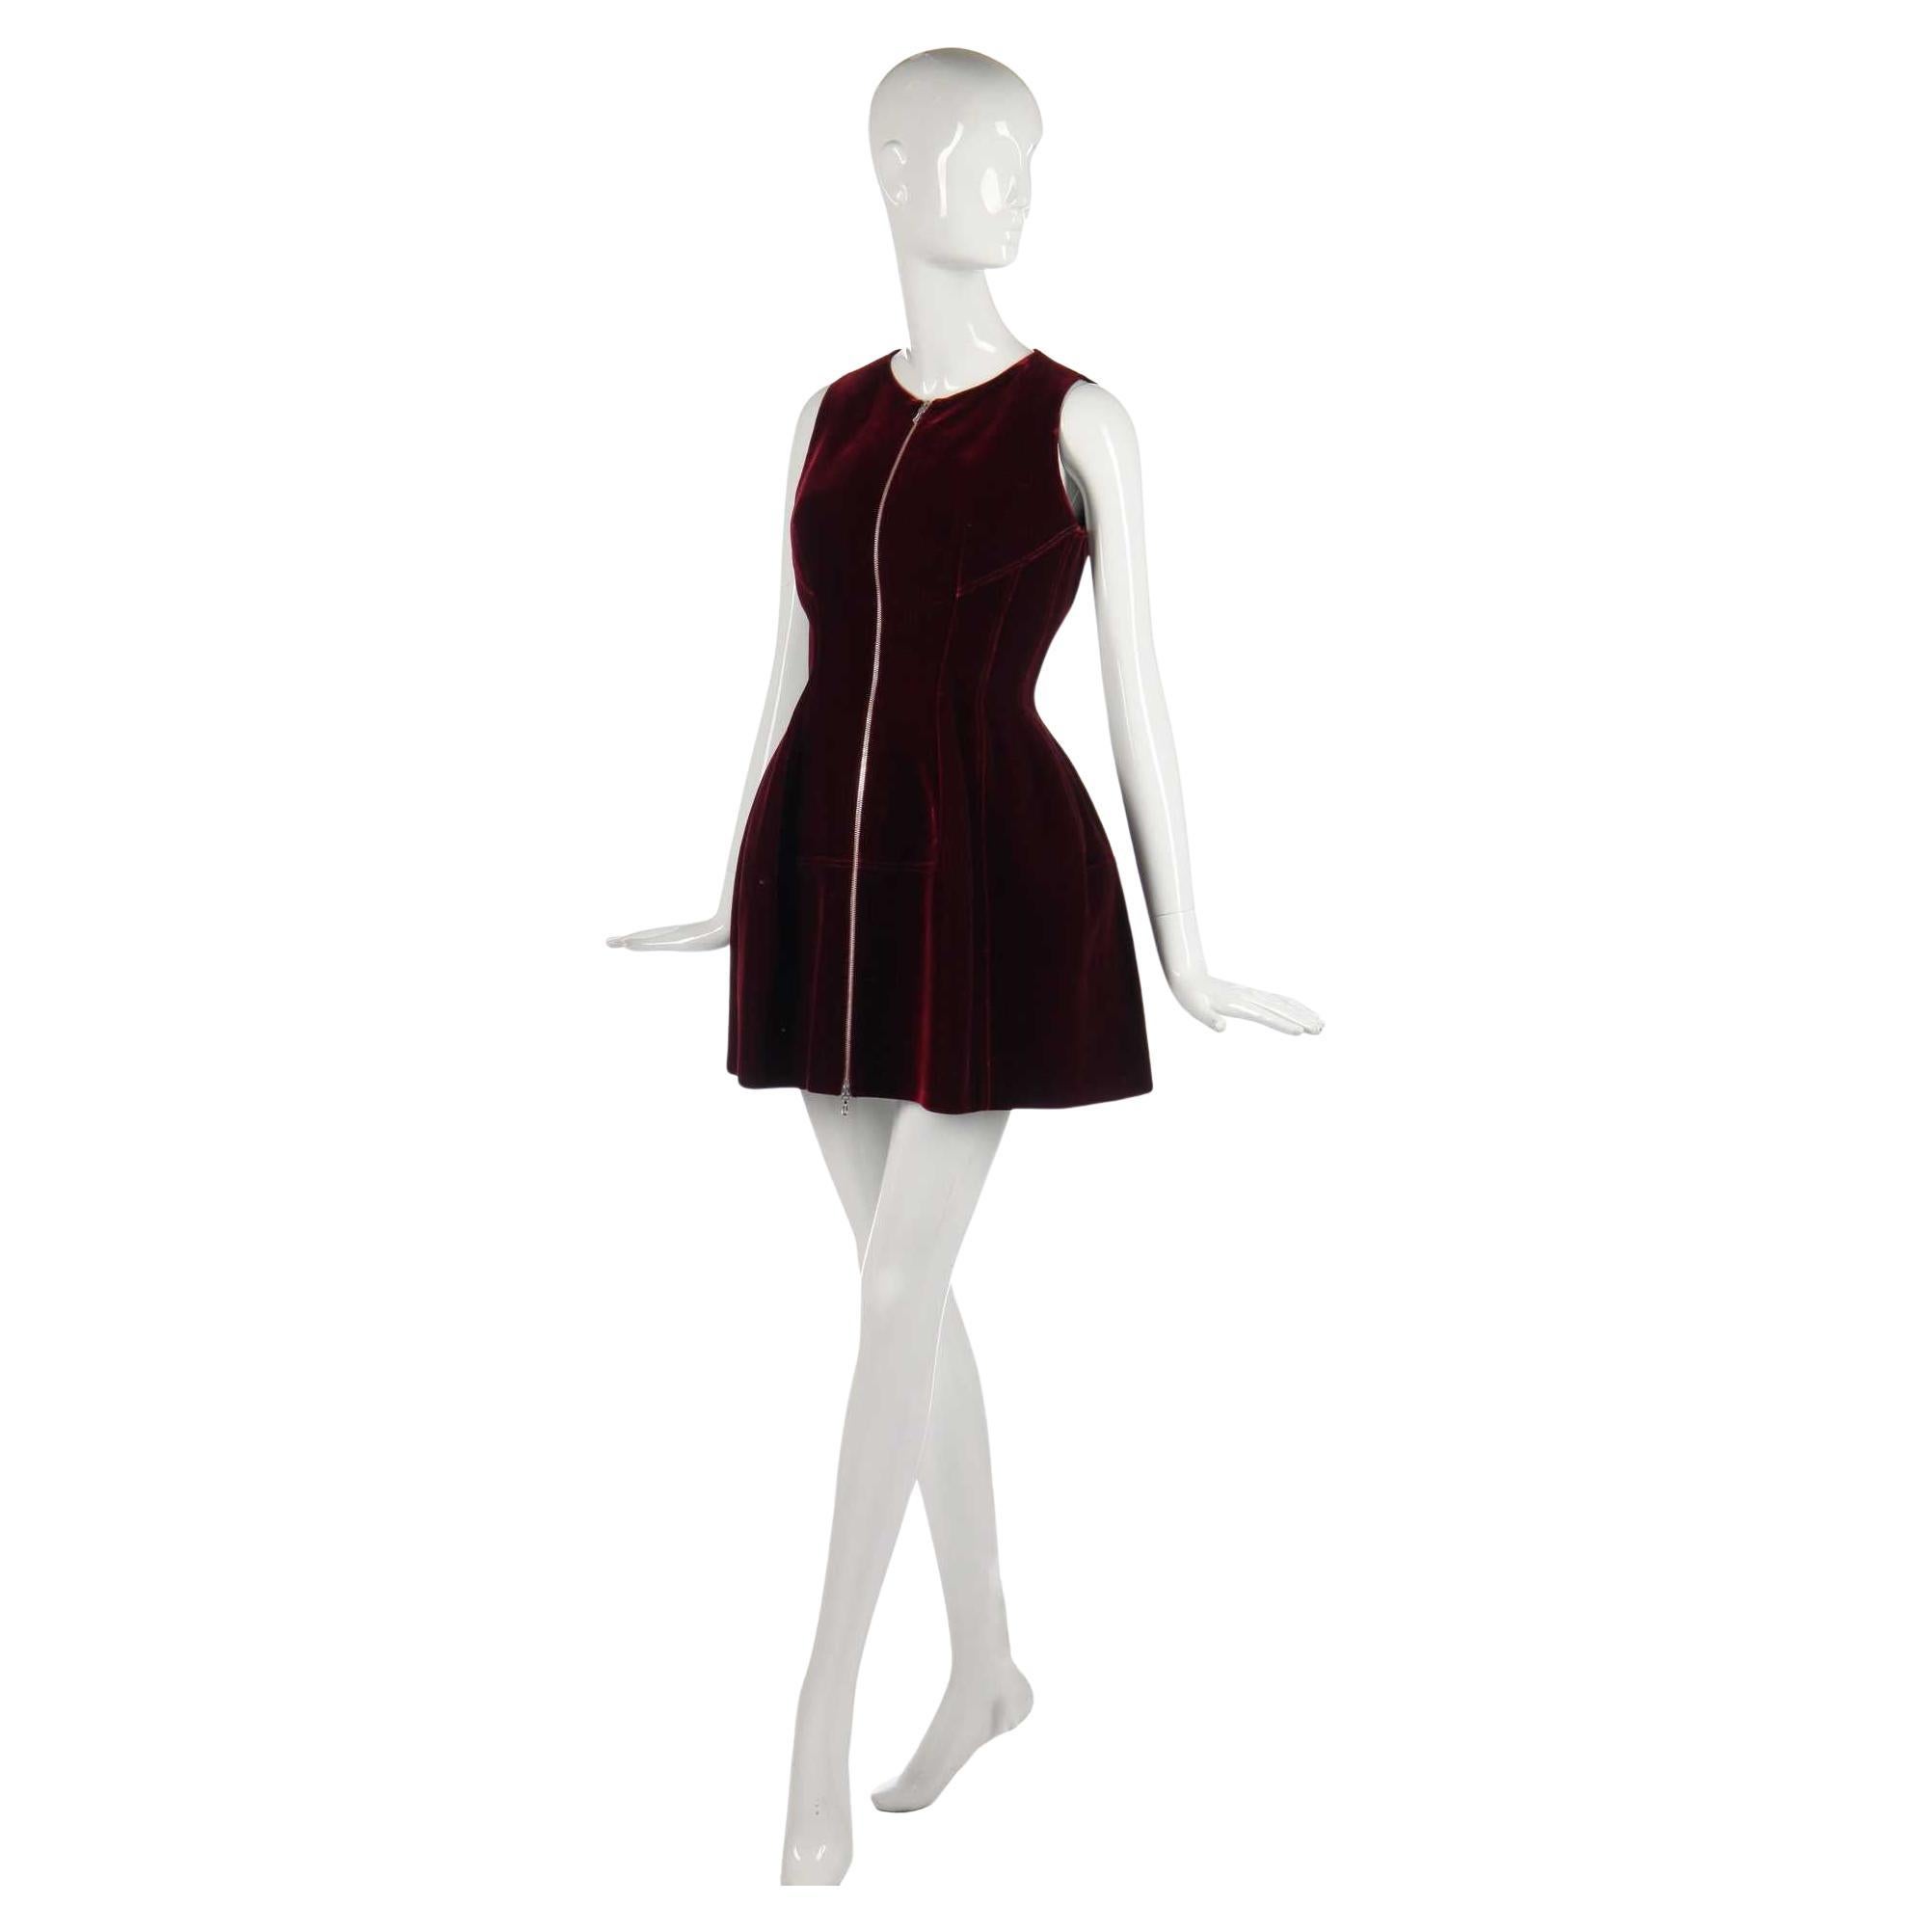 Azzedine Alaïa burgundy velvet dress from 1980s-1990s. Spectacularly structured mini dress with front-facing metal zipper. Formed into a tulip-like shape by top-stitched figure-hugging panels. A deep burgundy, wine red. Perfect for fall and winter,